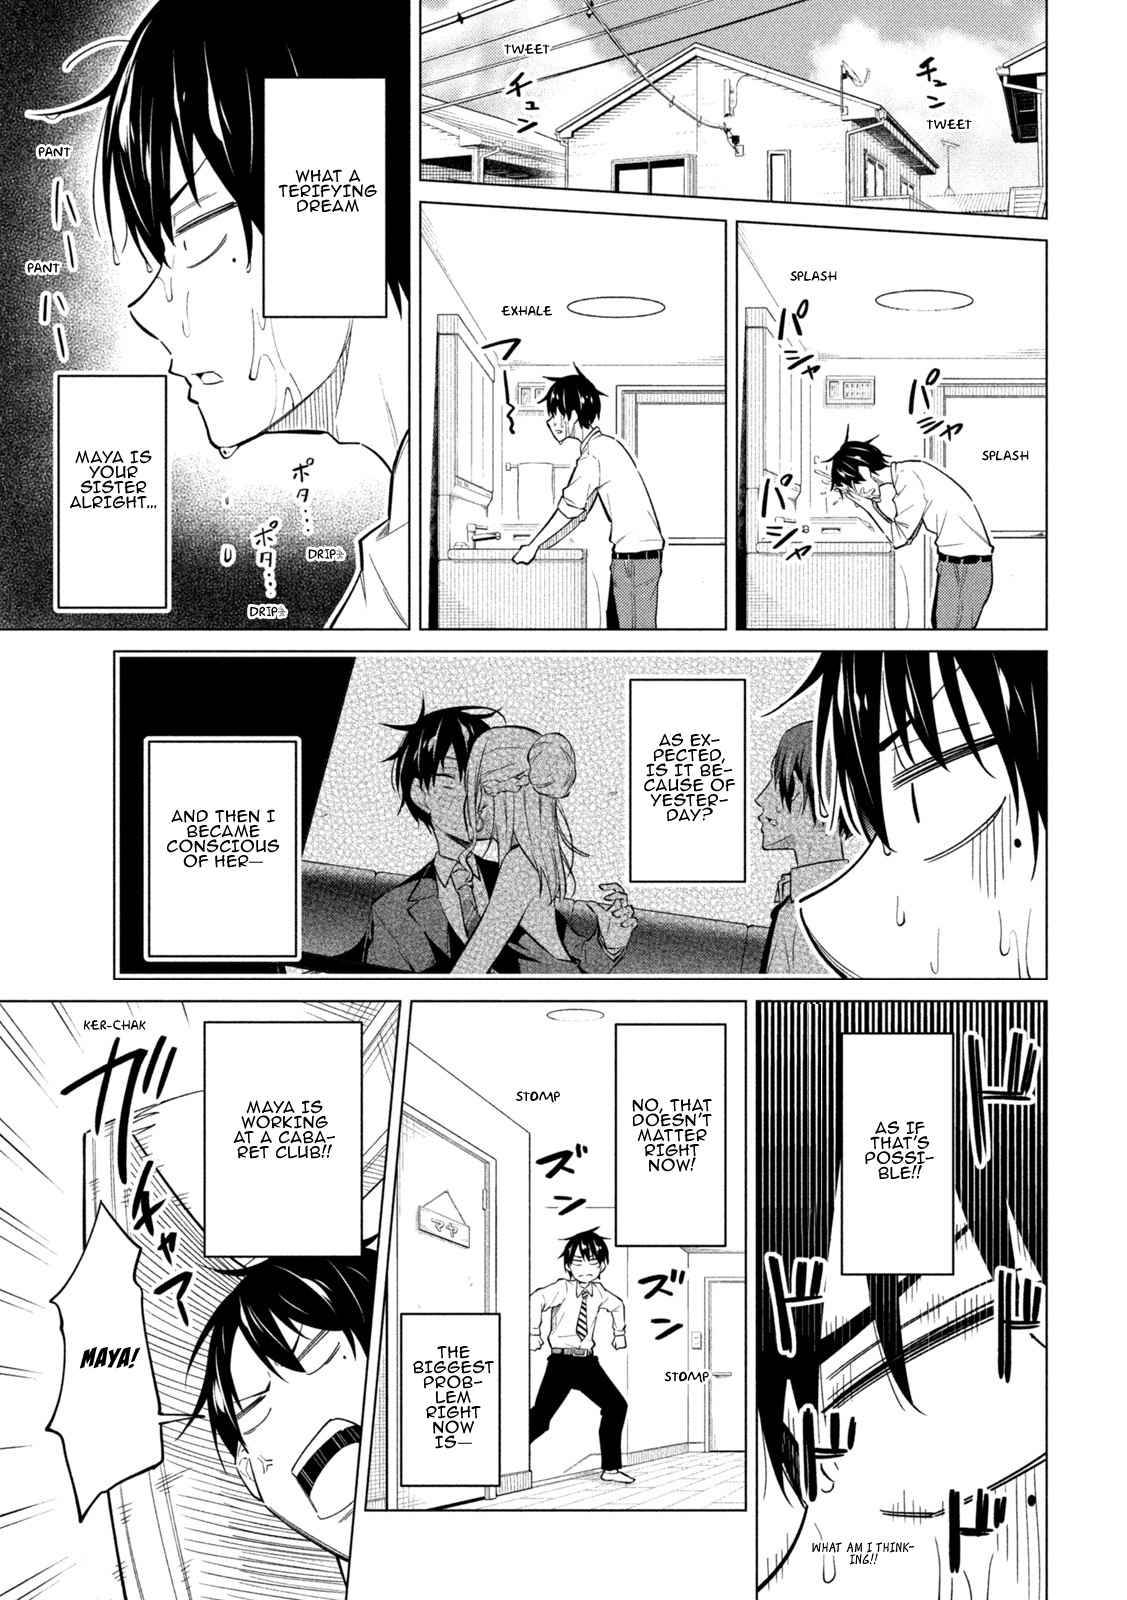 Home Cabaret ~Operation: Making a Cabaret Club at Home so Nii-chan Can Get Used to Girls - chapter 2 - #3